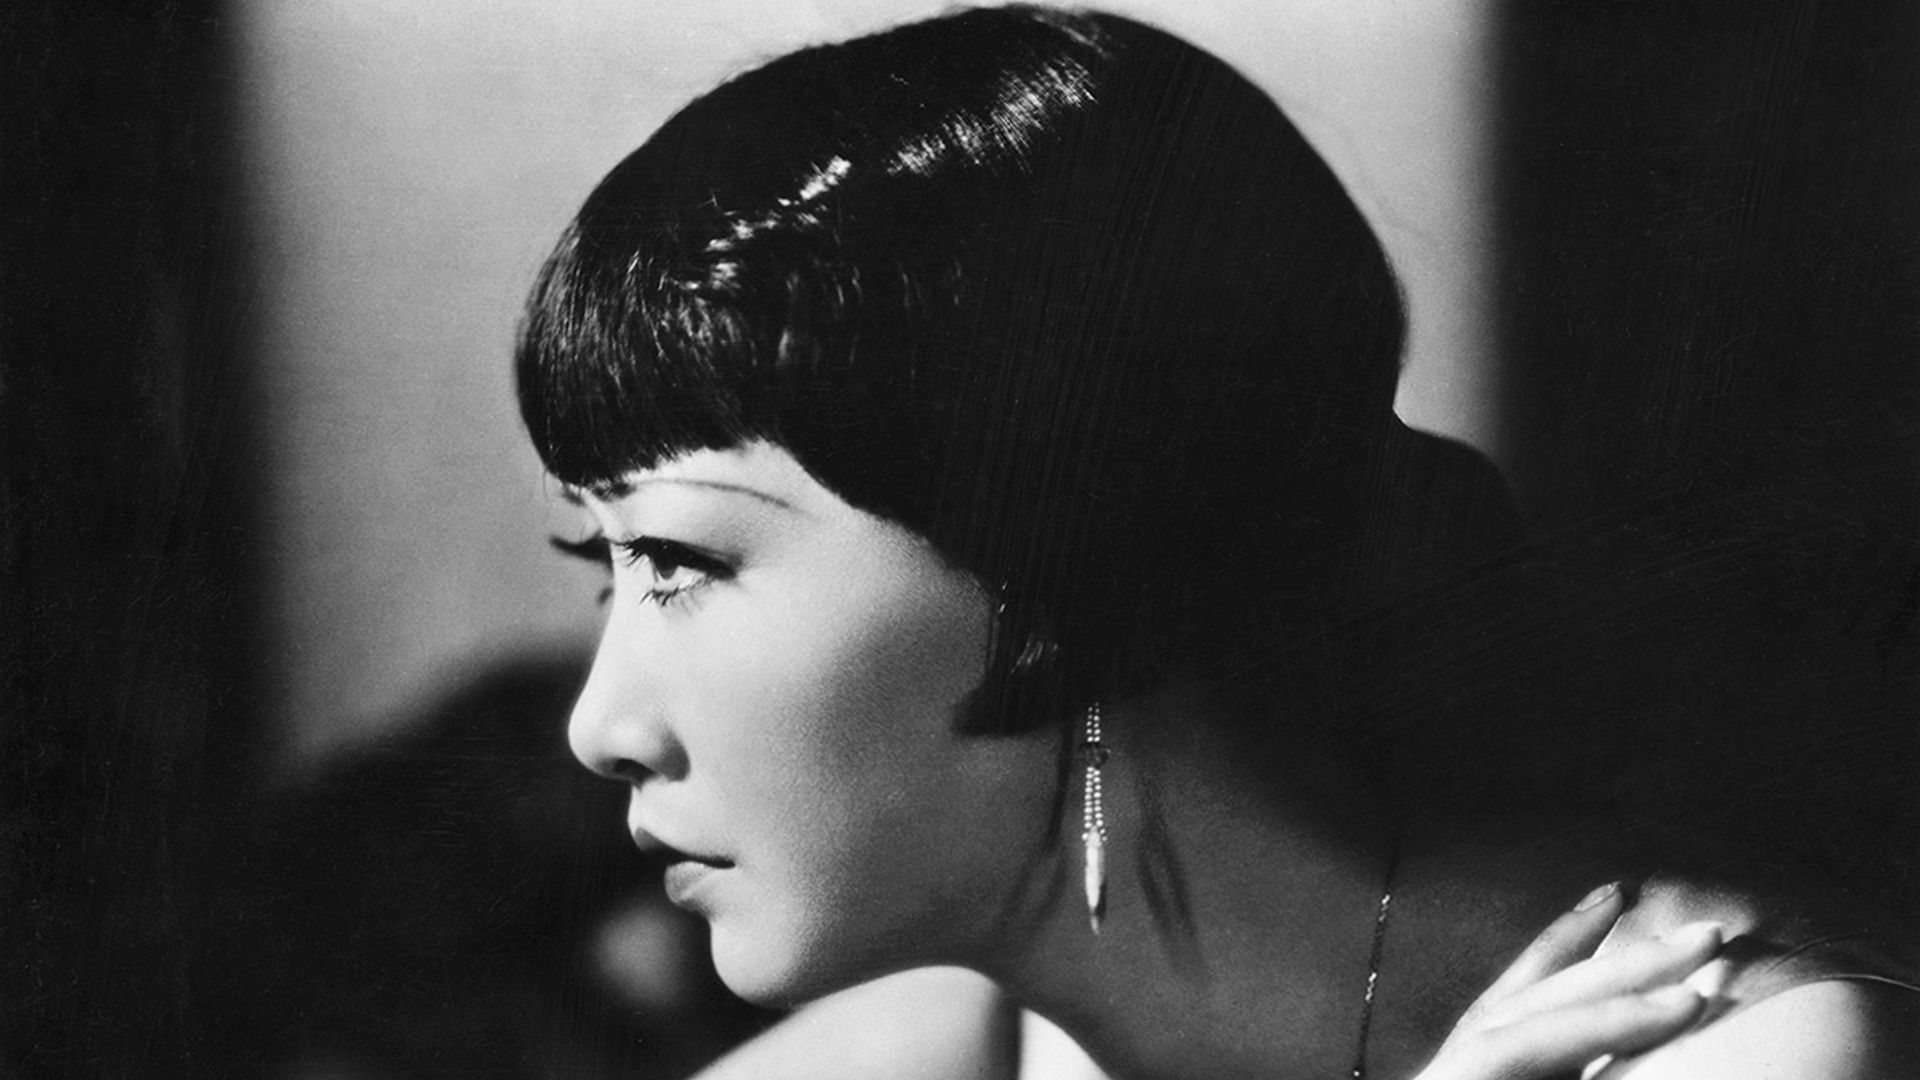 1920s fashion trends that defined the decade